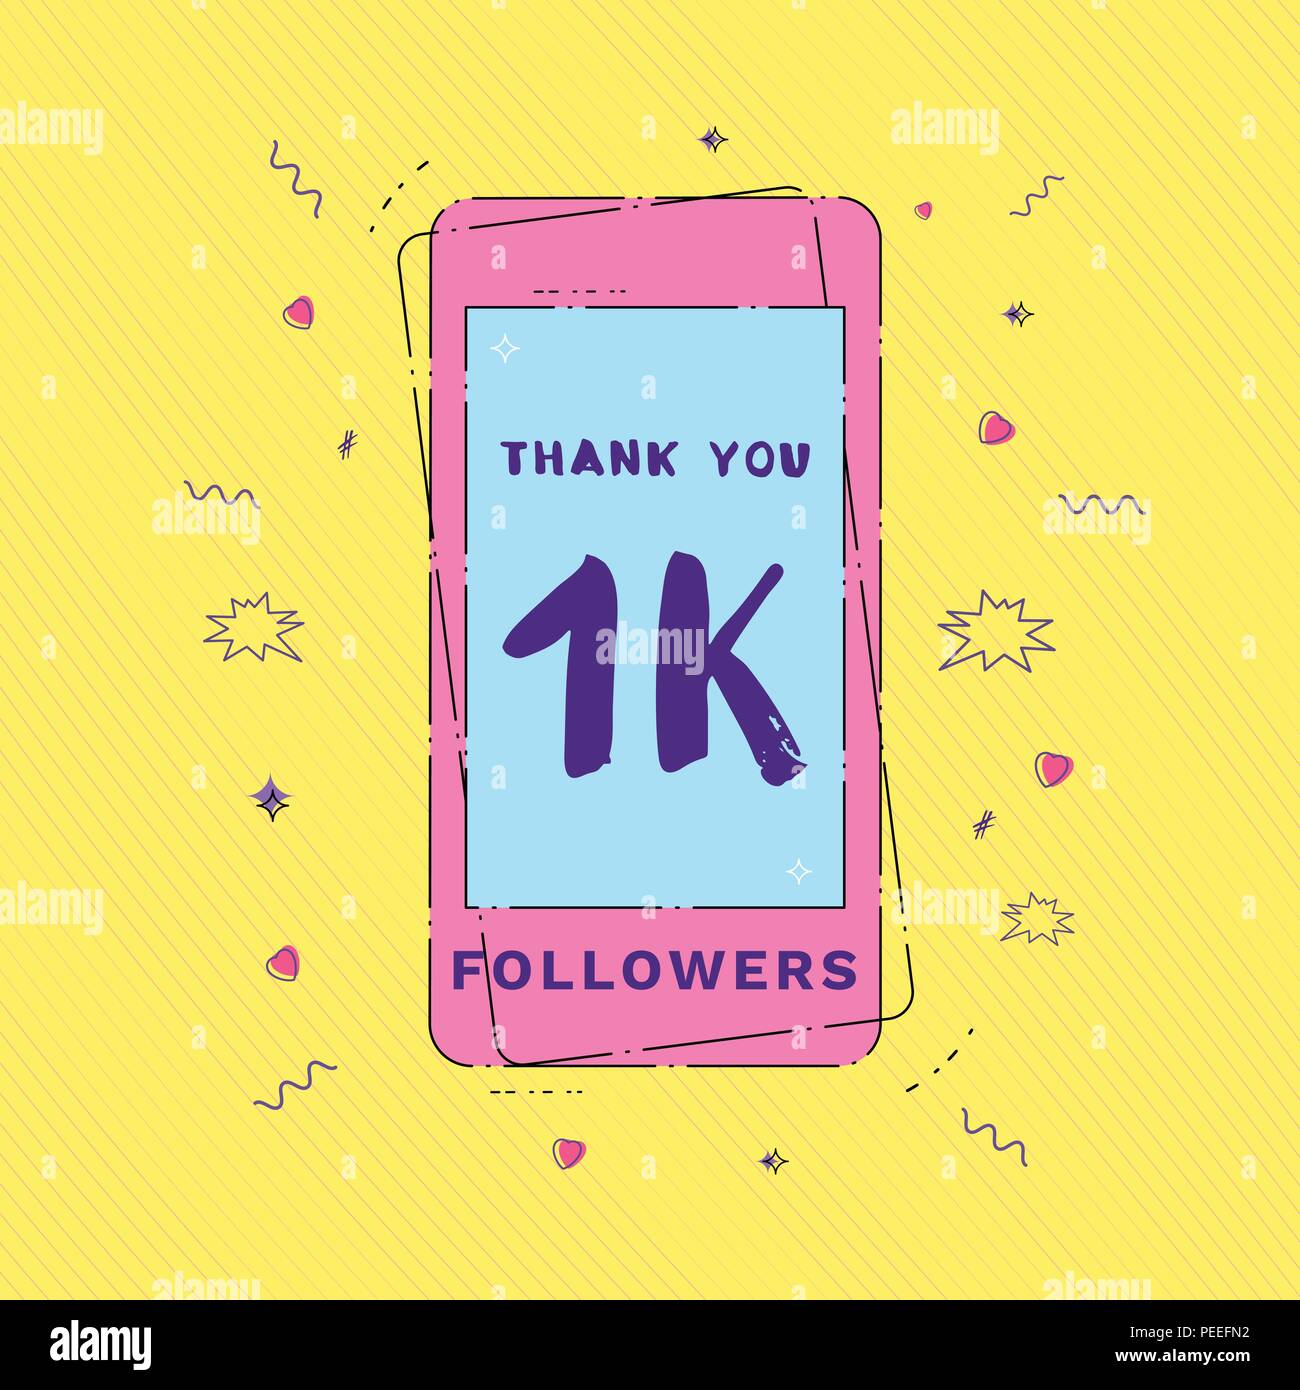 1K Followers thank you message with phone and random items. Template for social media post. Glitch chromatic aberration style. 1000 subscribers memphi Stock Vector